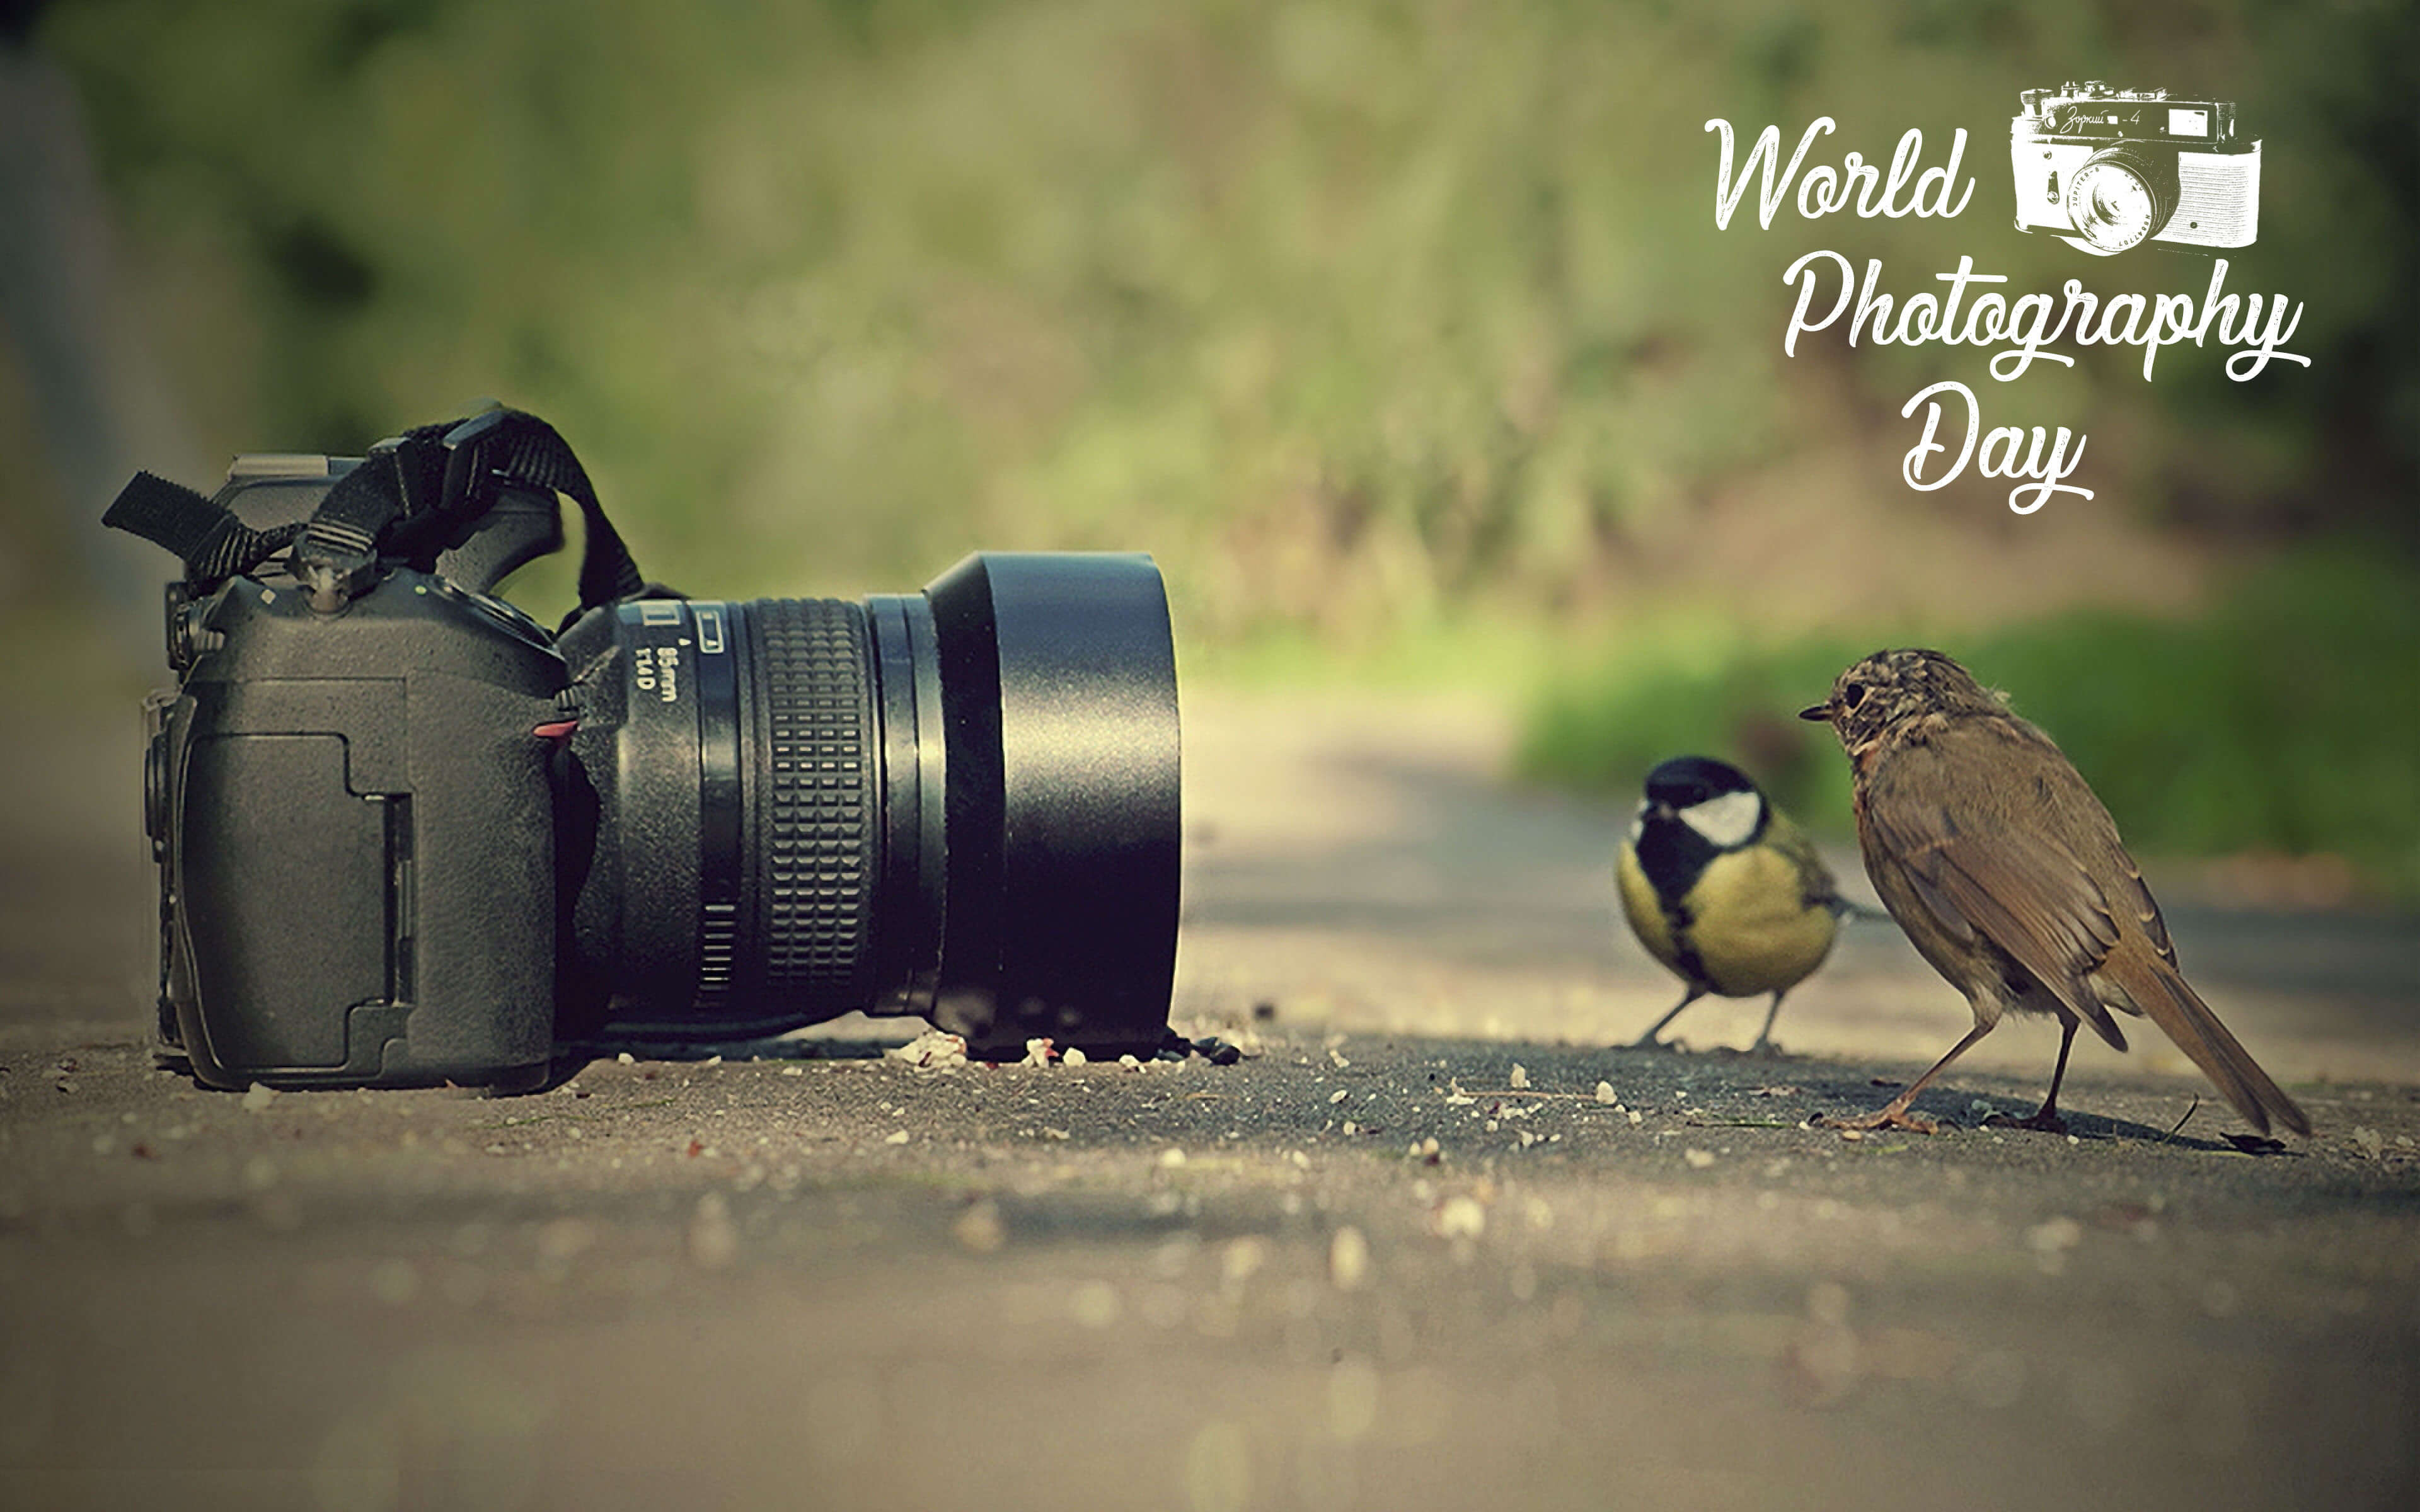 World Photography Day Wallpaper